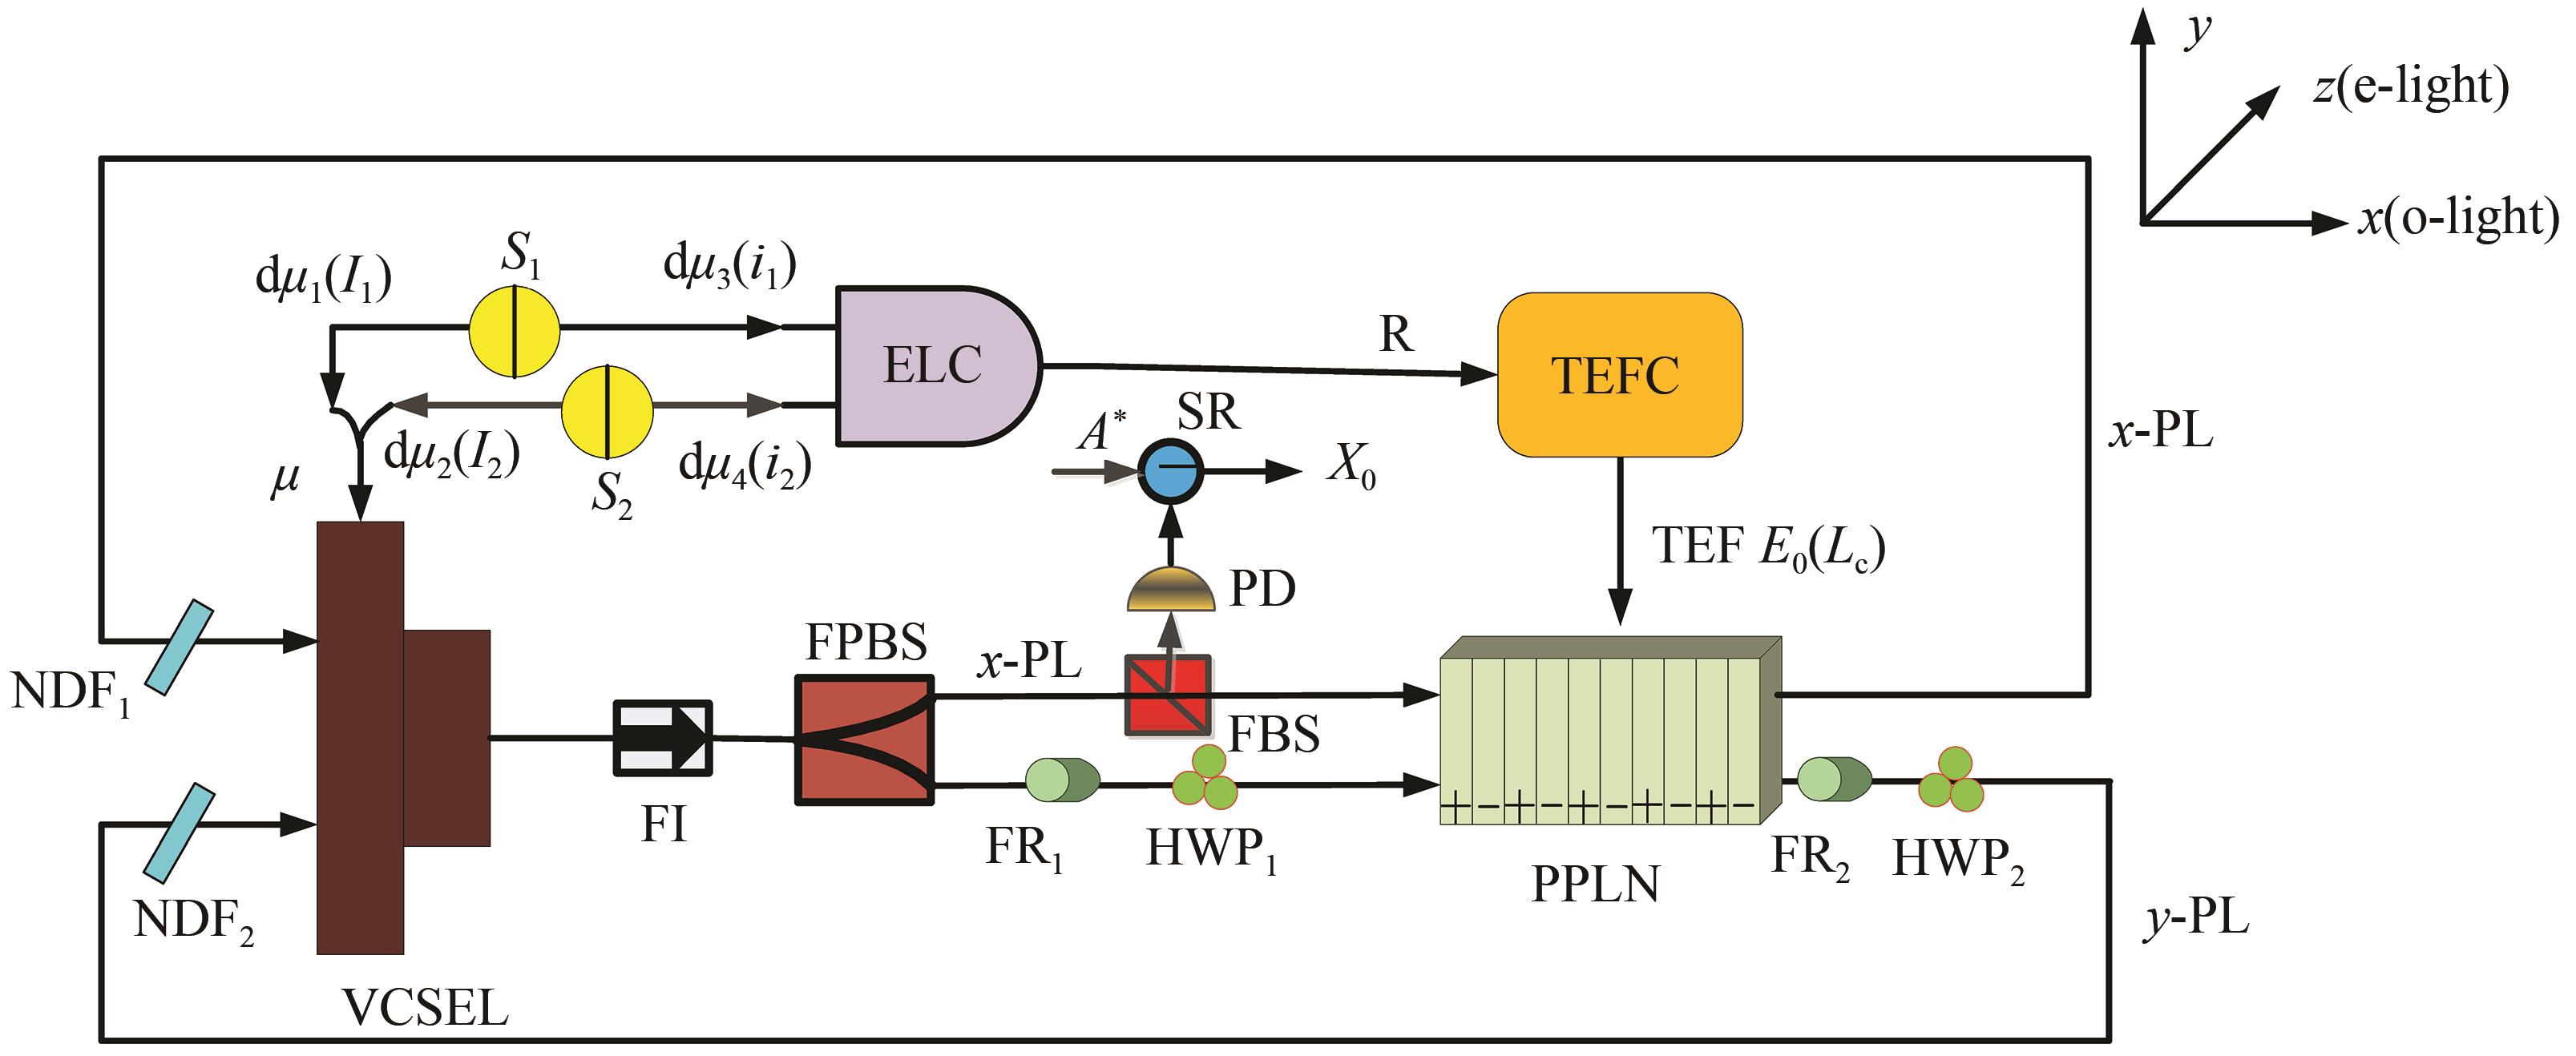 Schematic diagram for reconfigurable chaotic logic operations of VCSEL with optical feedback